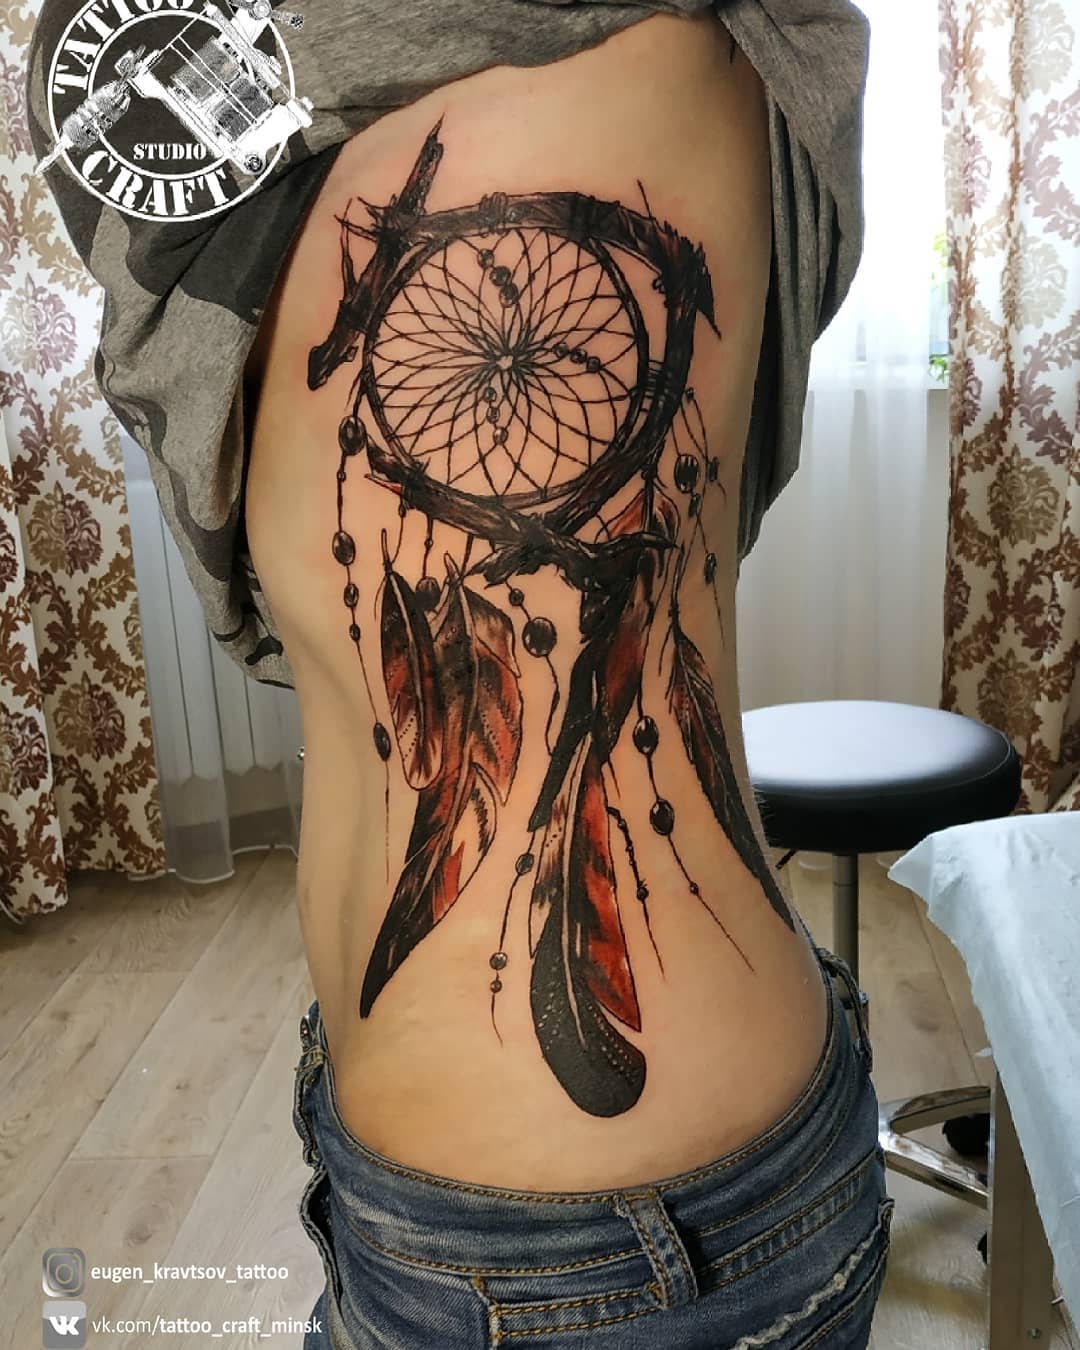 I love the idea of incorporating a dream catcher into a great tattoo. The side ribs are a great choice for the placement, because you can see them but they're not too obvious. The giant dark orange feathers give this tattoo an extra beauty!